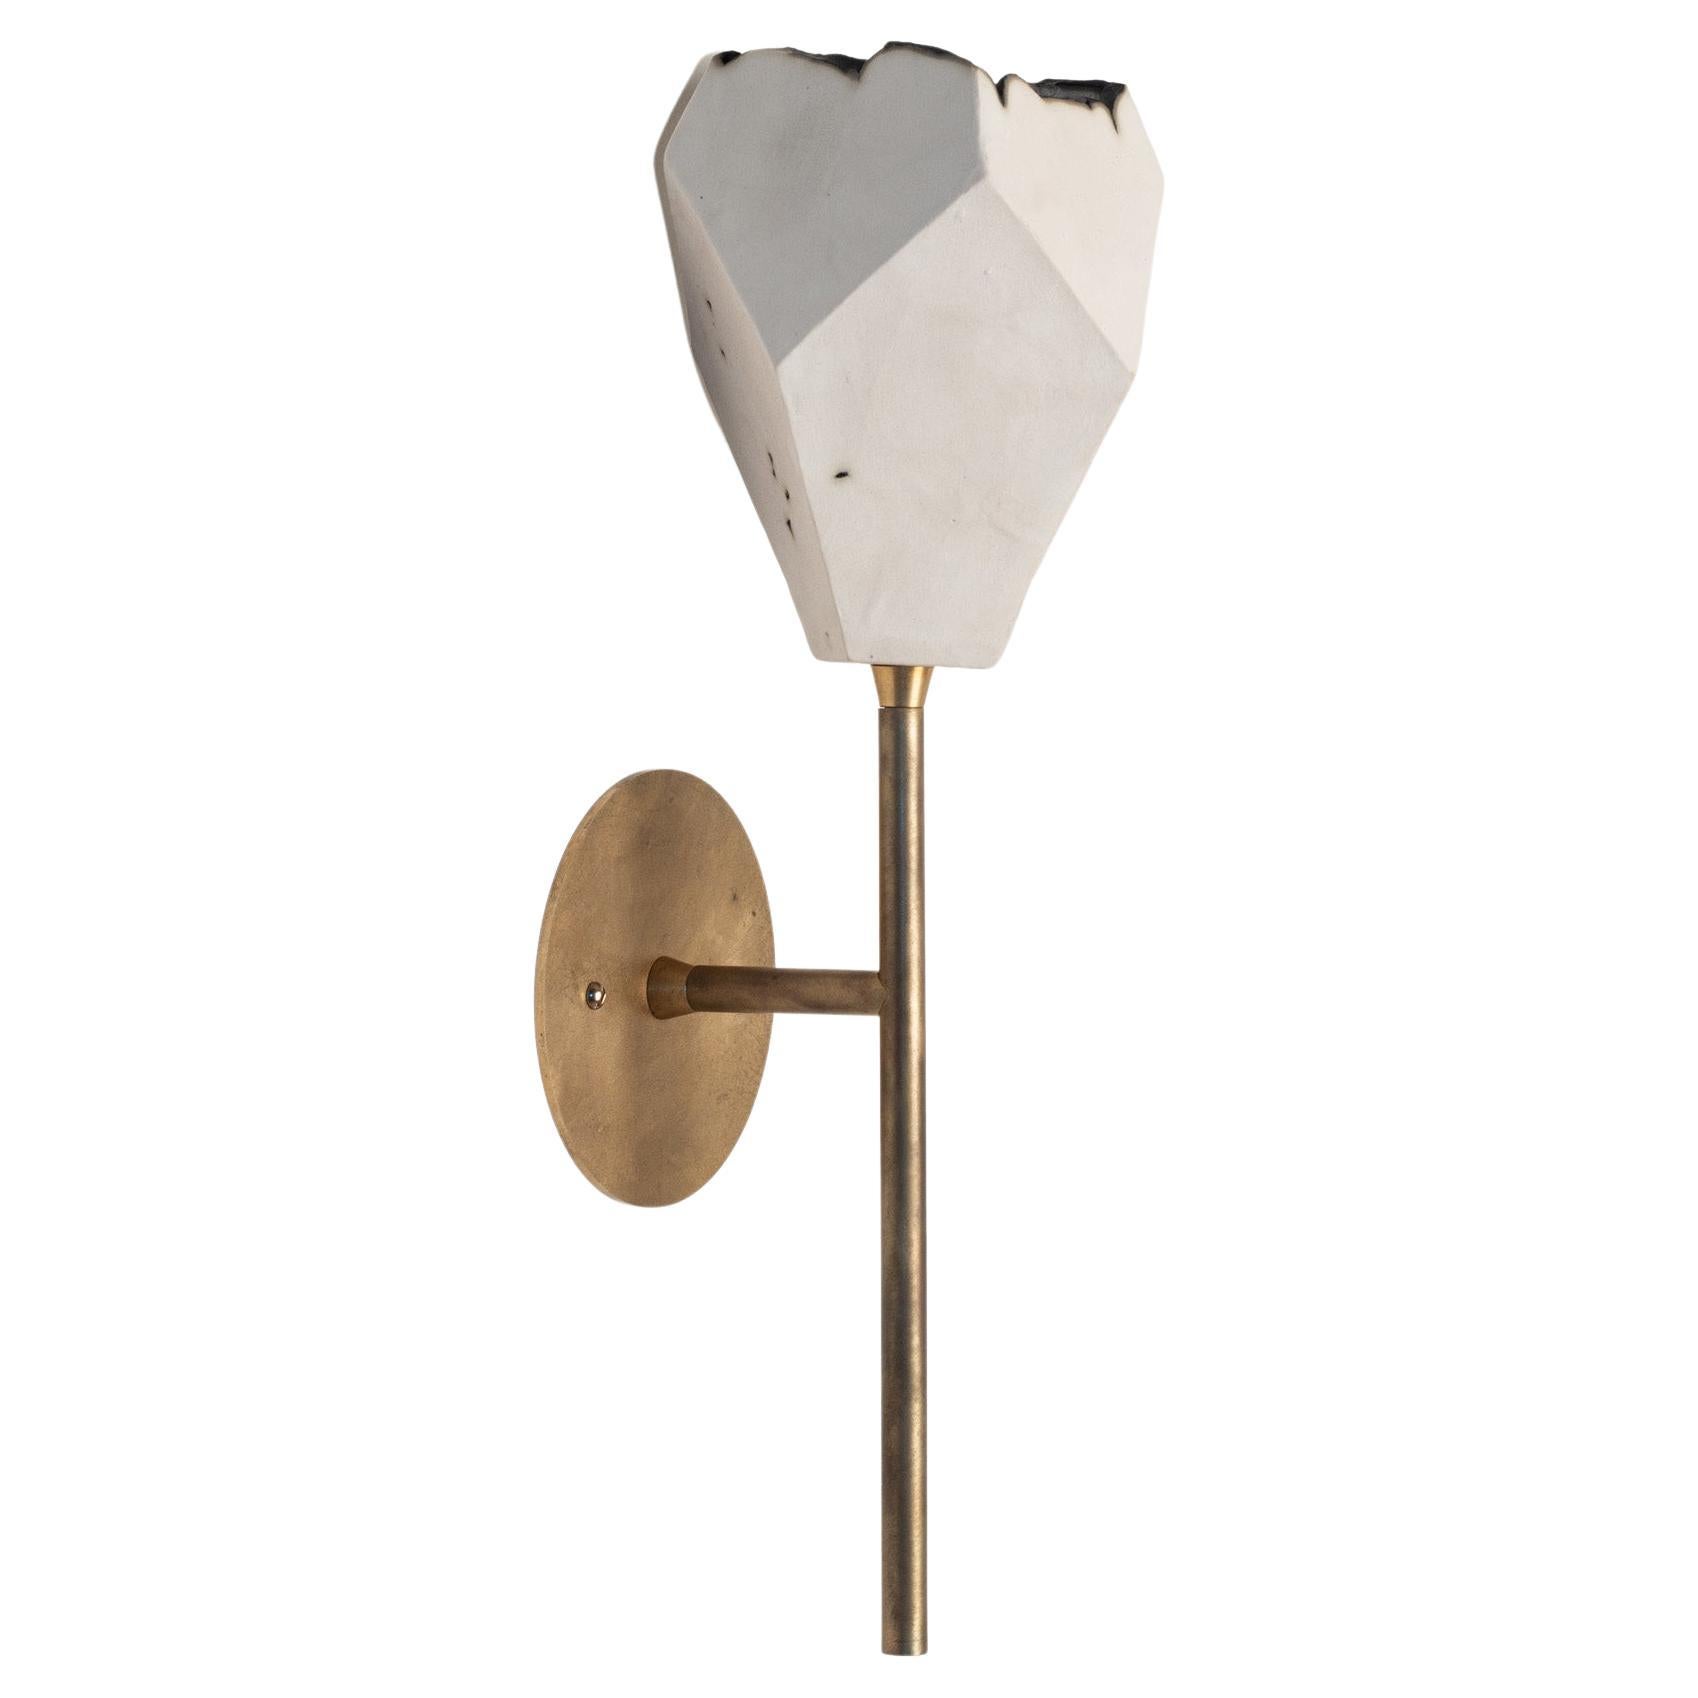 Relic Torch - Geometric White Porcelain and Brass Modern Sconce For Sale